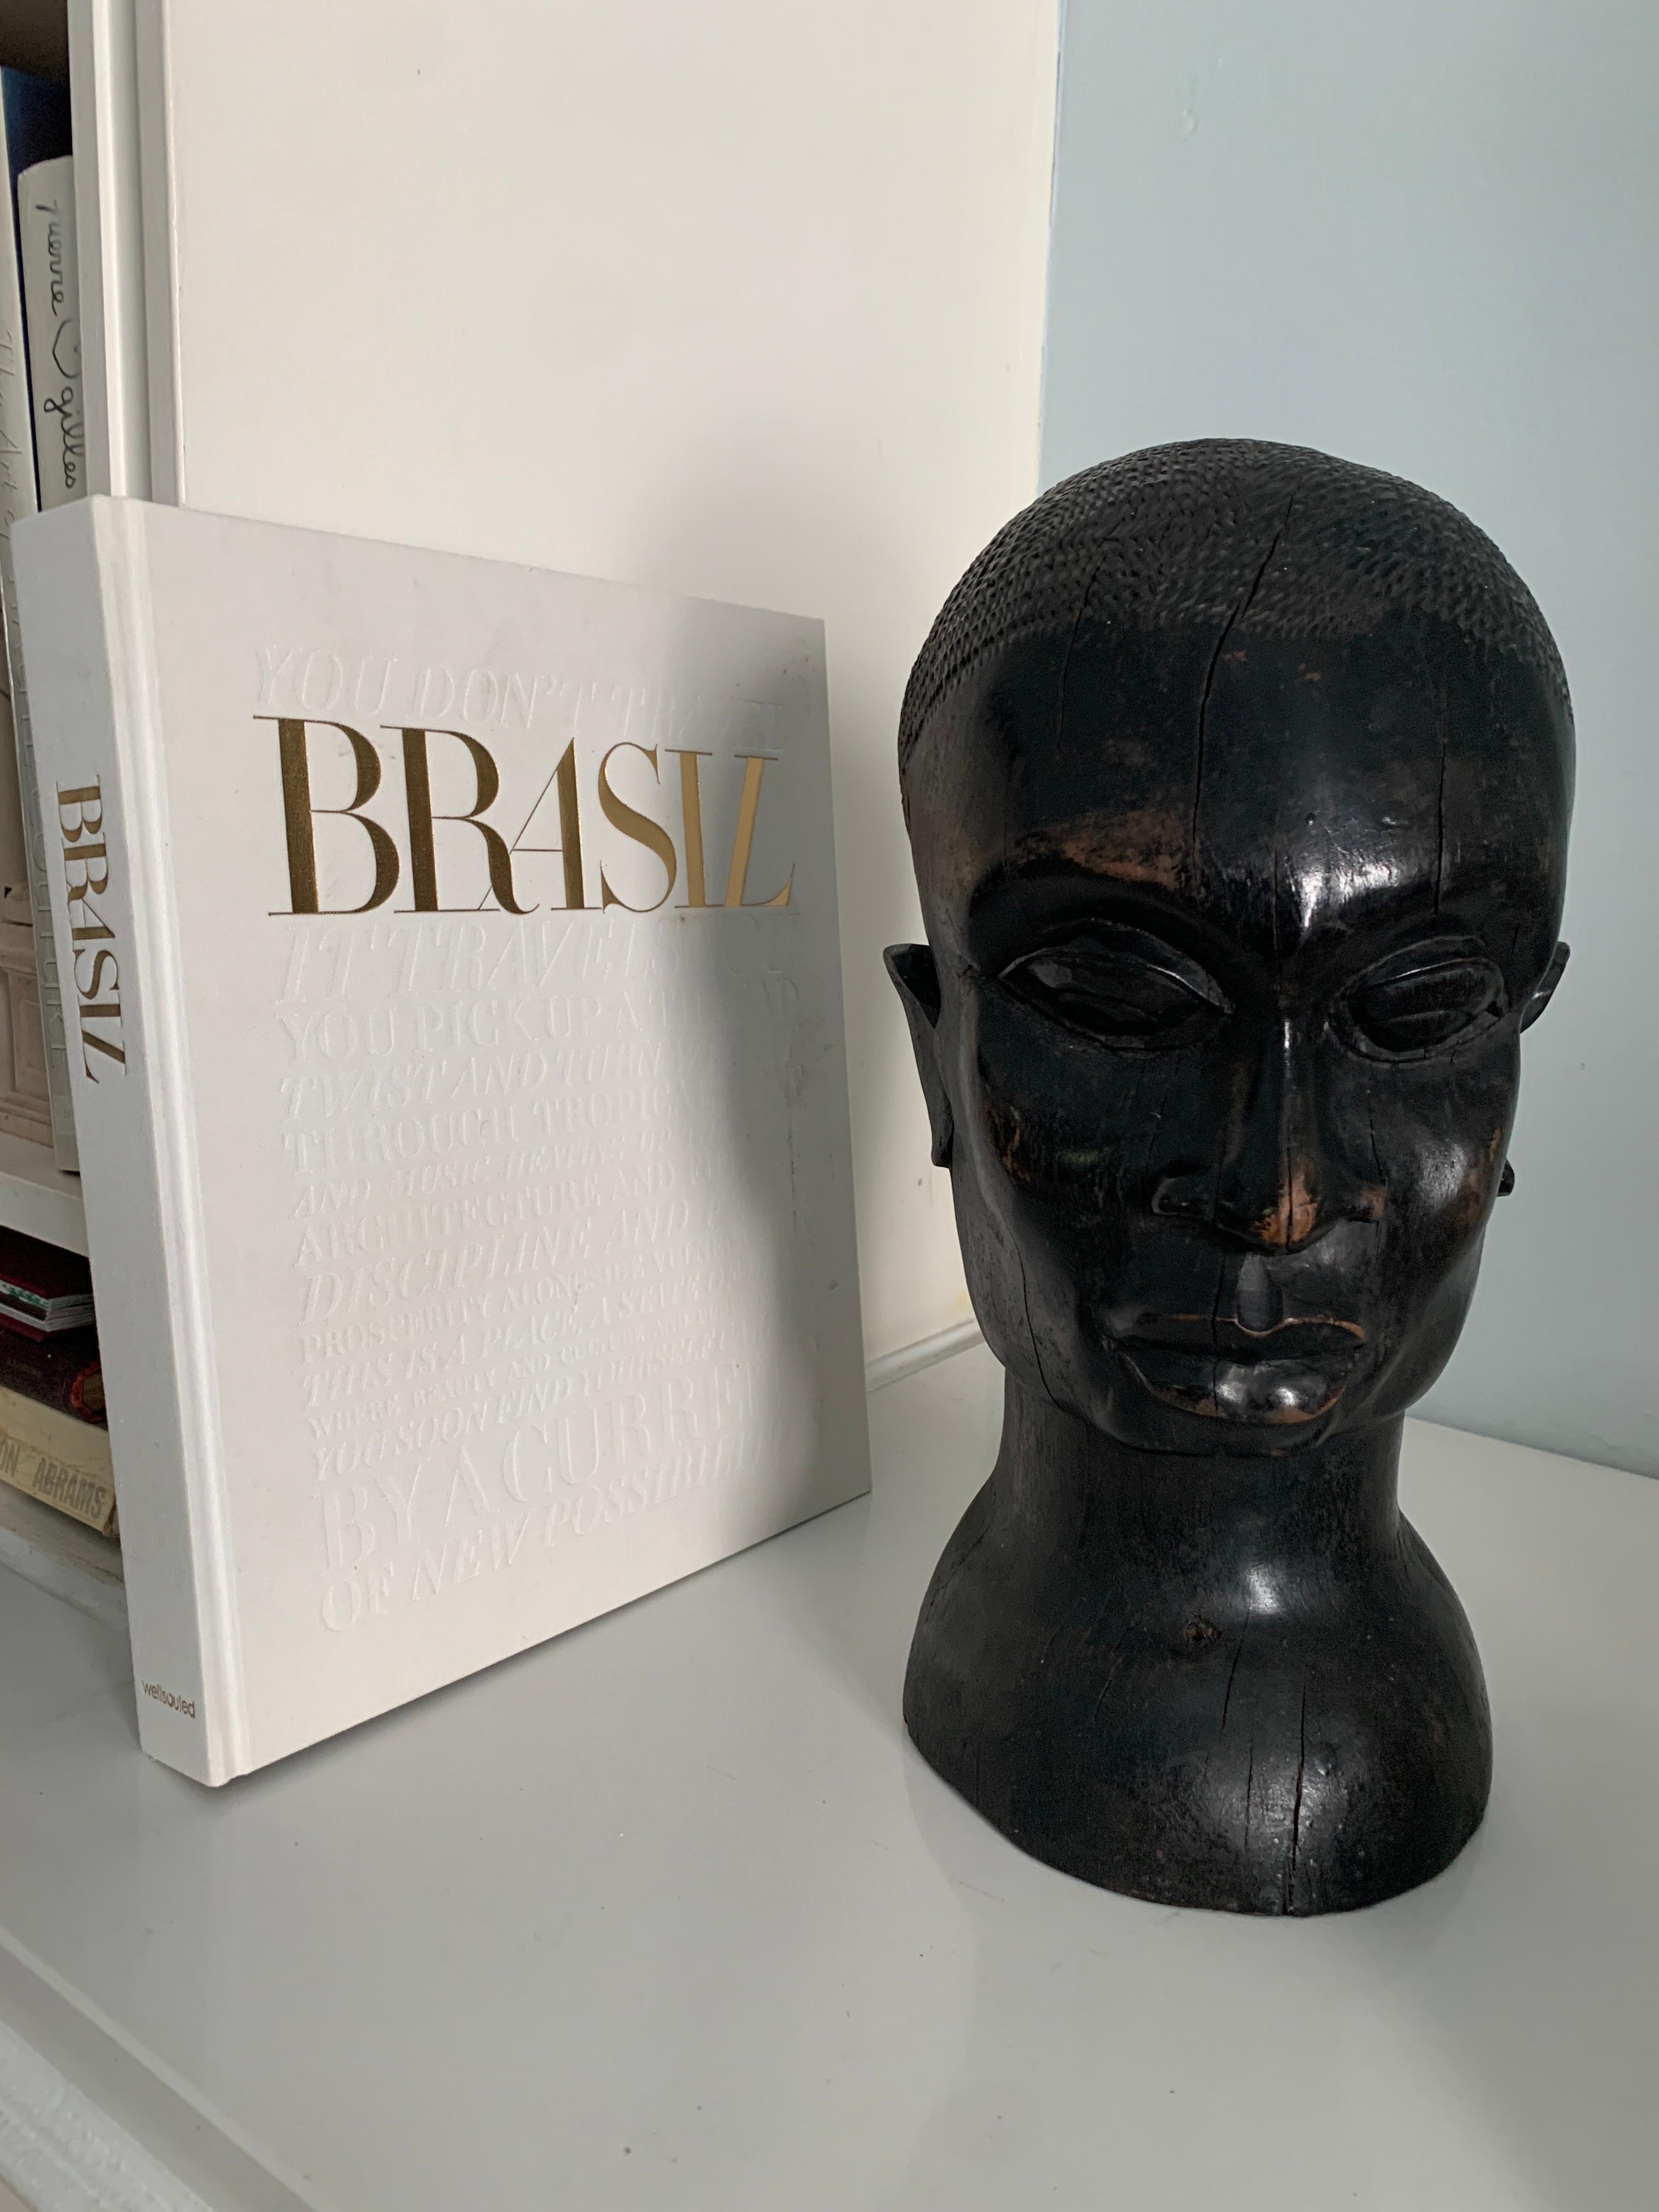 A wonderful hand carved head of Hardwood. A stunning sculpted and carved piece. A stand alone decorative piece or can be used as a large book end. Truly a compliment to any space and especially those with ethnic tones... a beautifully made face.